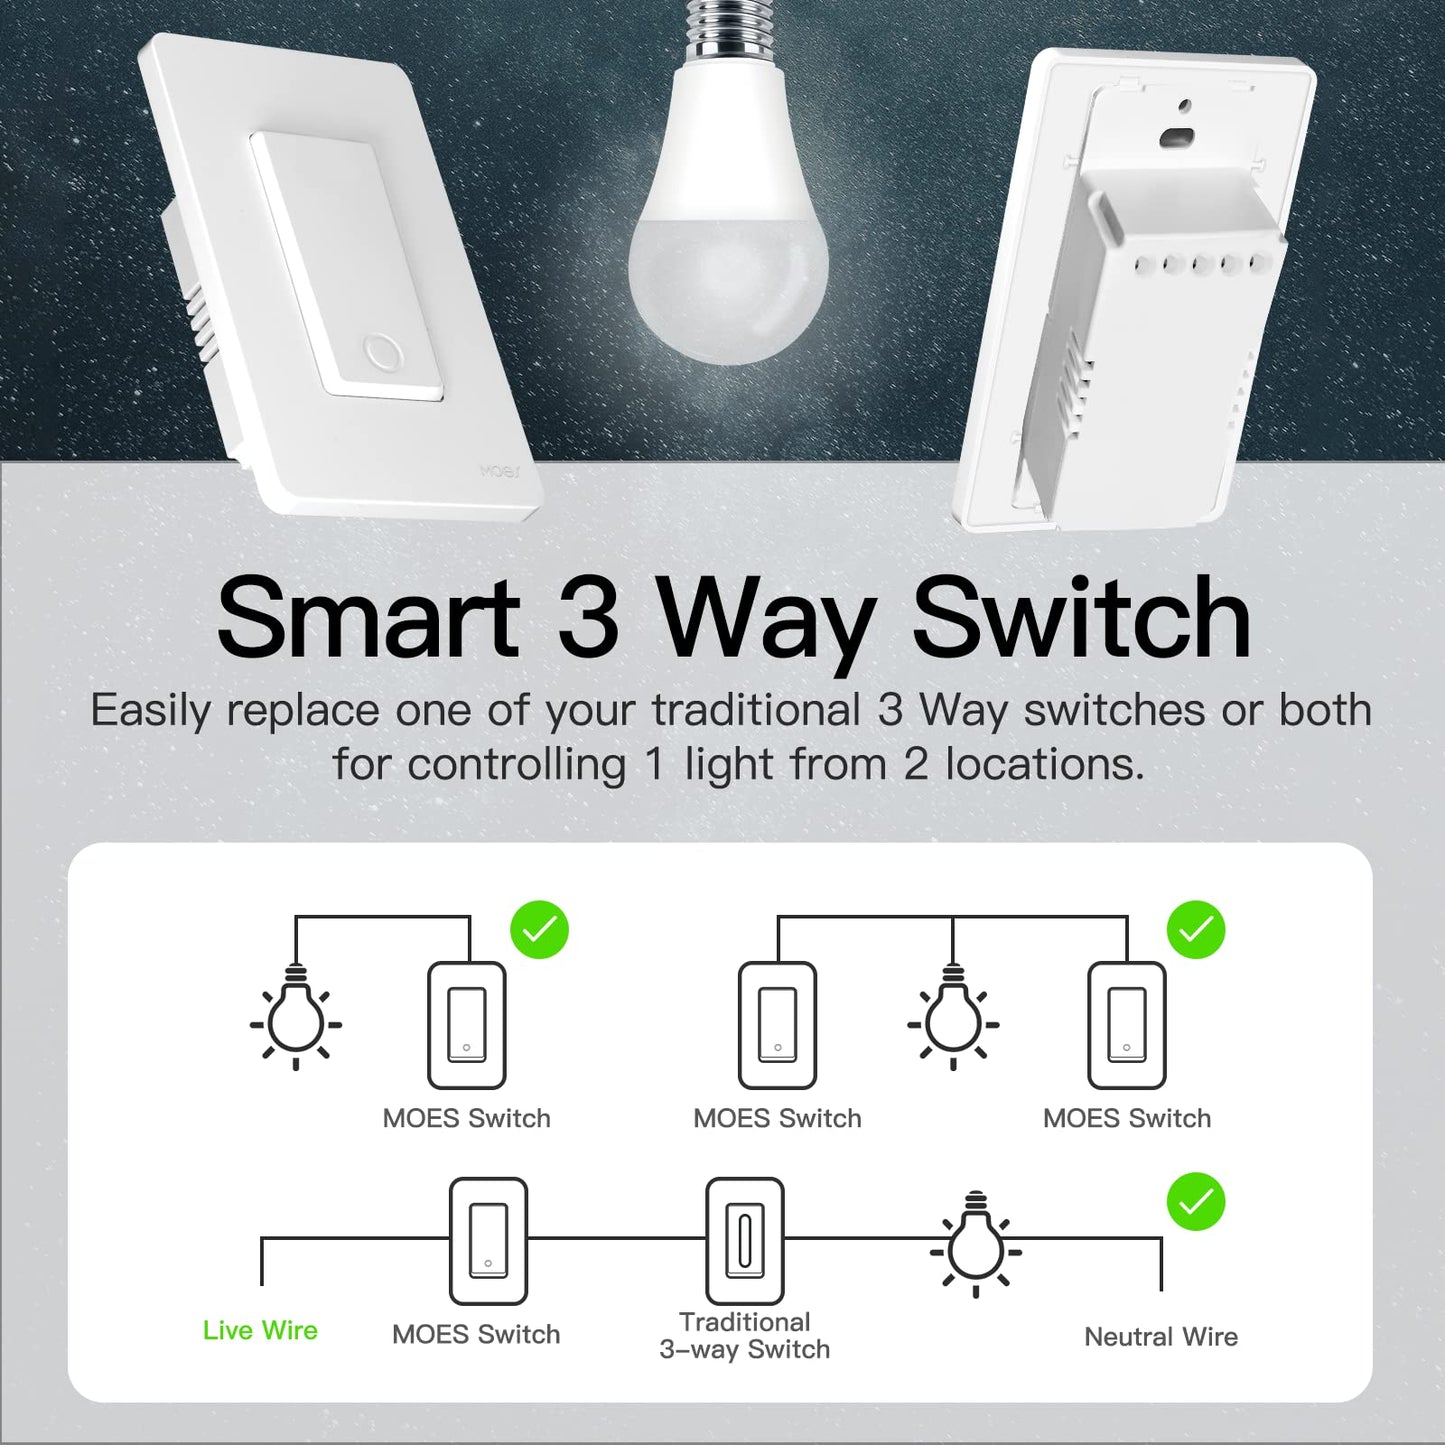 Easily replace one of your traditional 3 Way switches or bothfor controlling 1 ight from 2 locations. - MOES